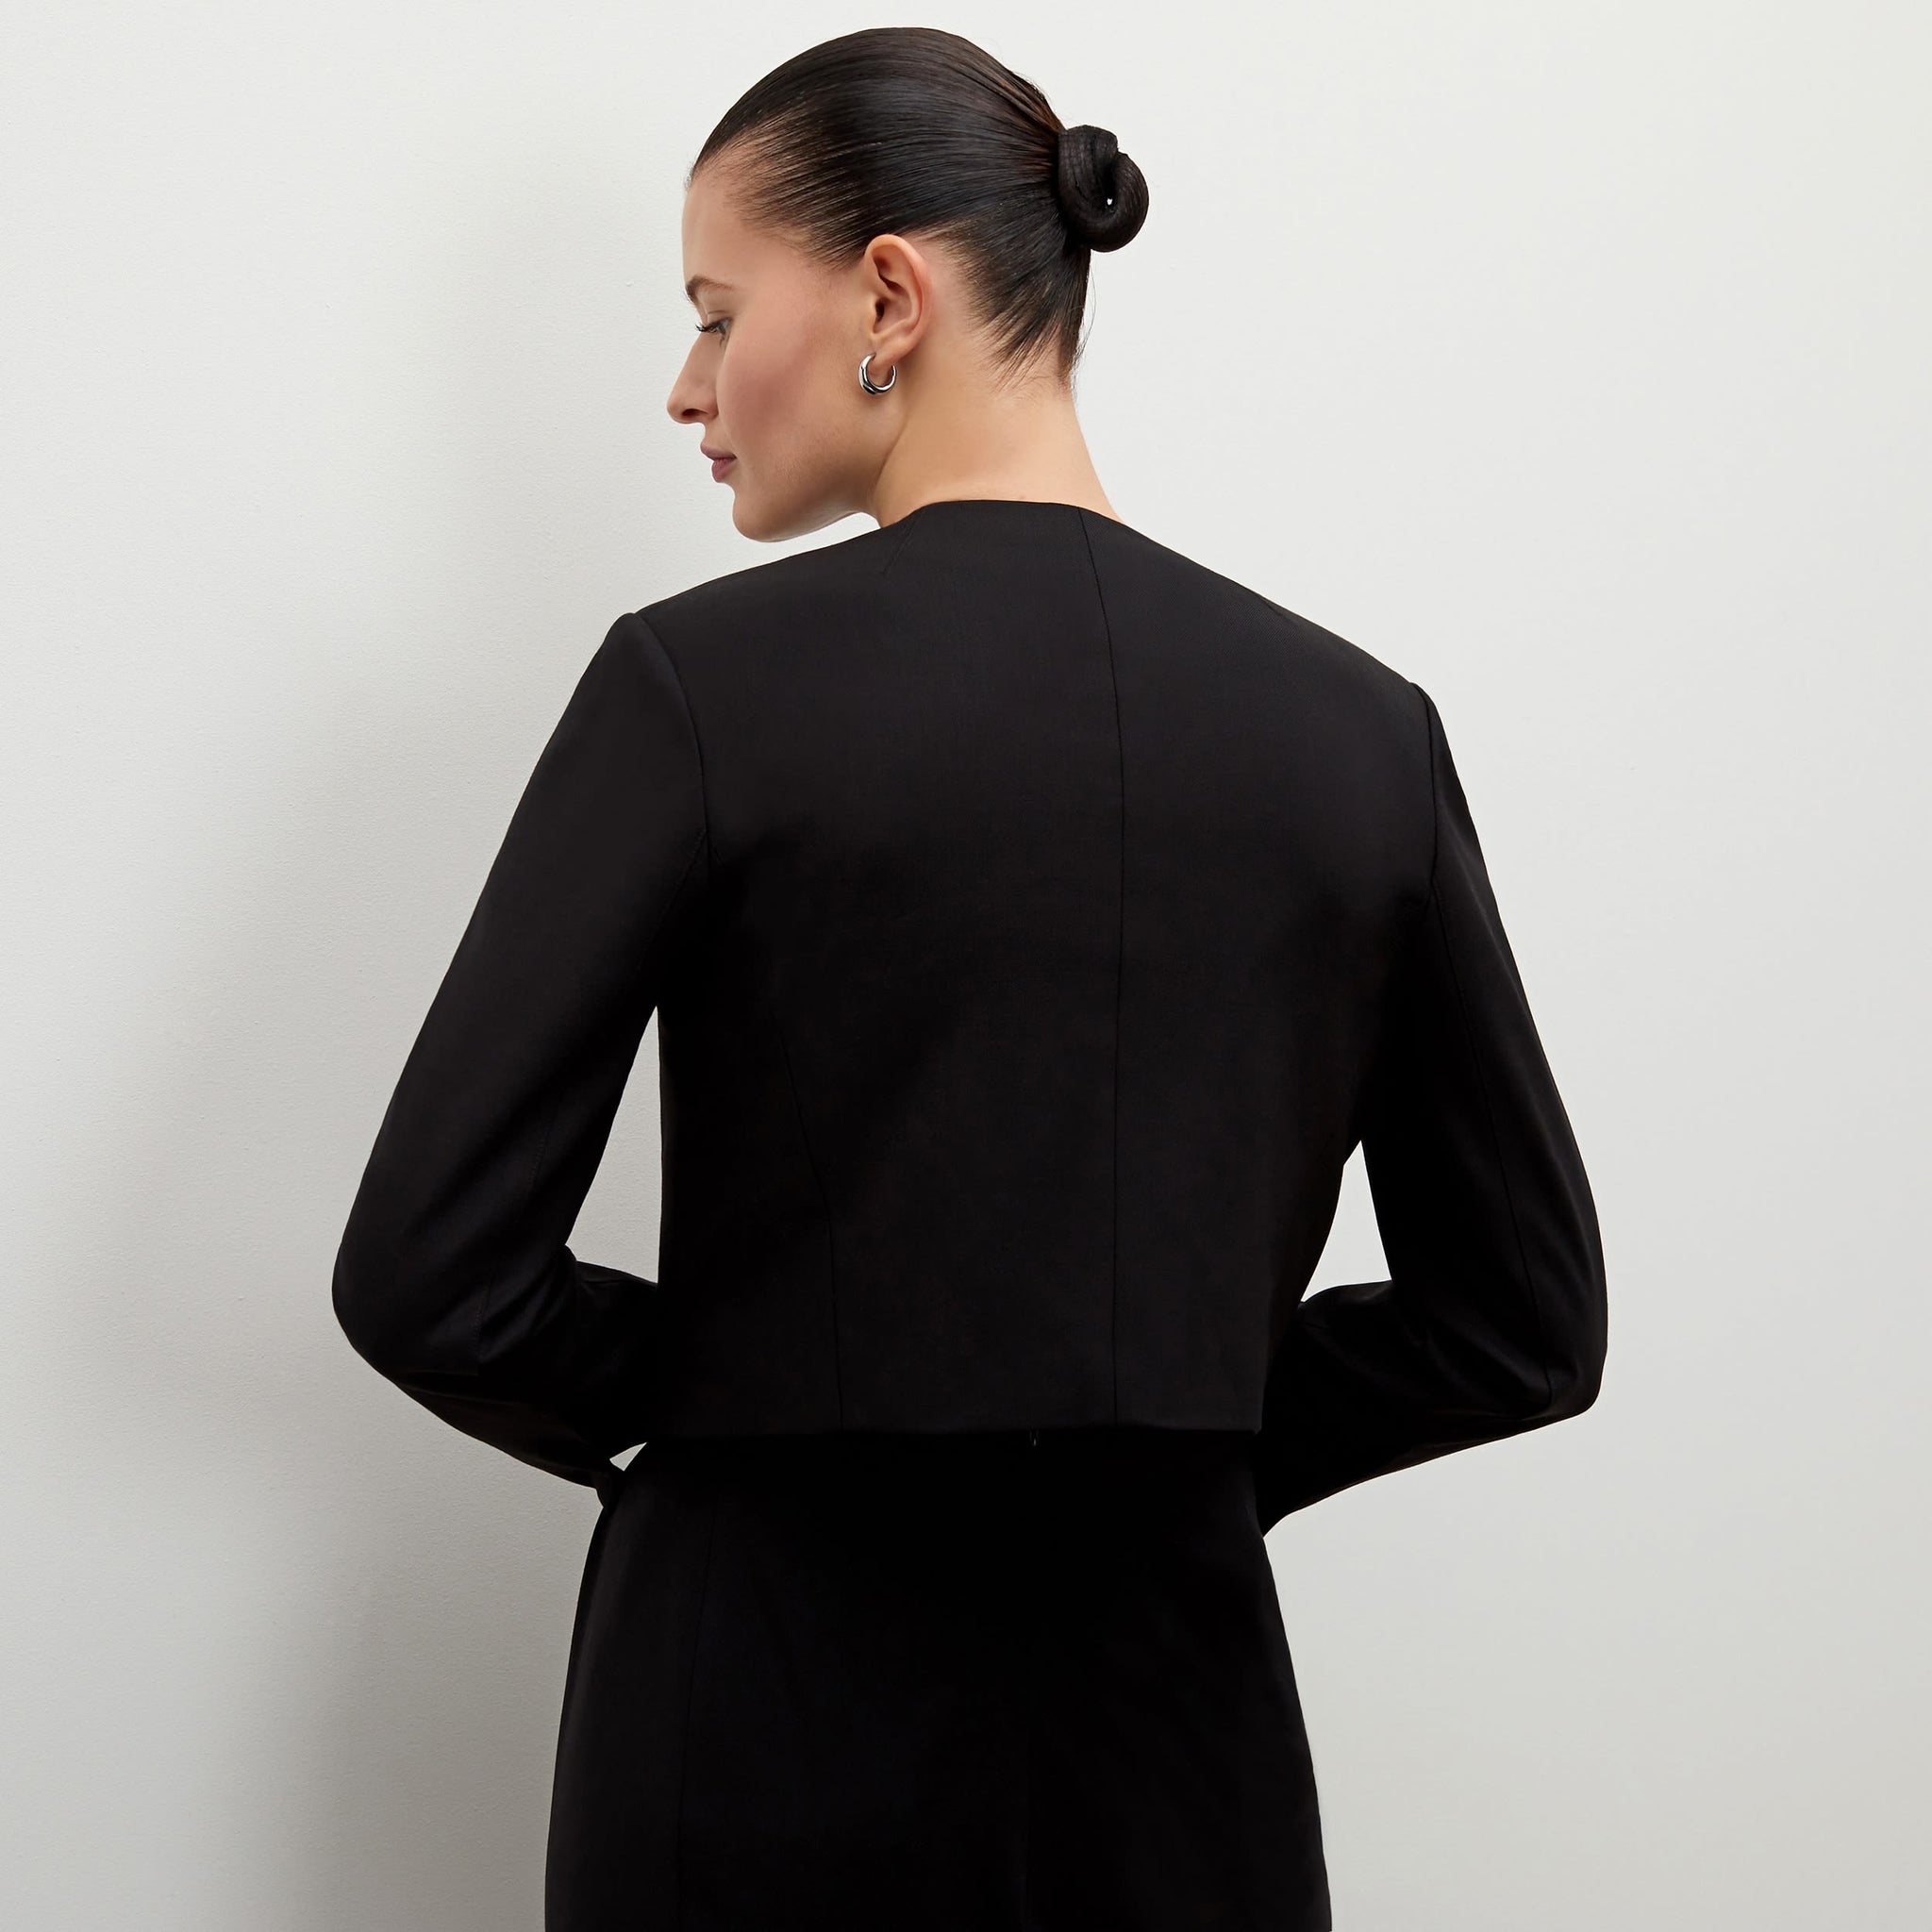 Back image of a woman standing wearing the Neale jacket in black